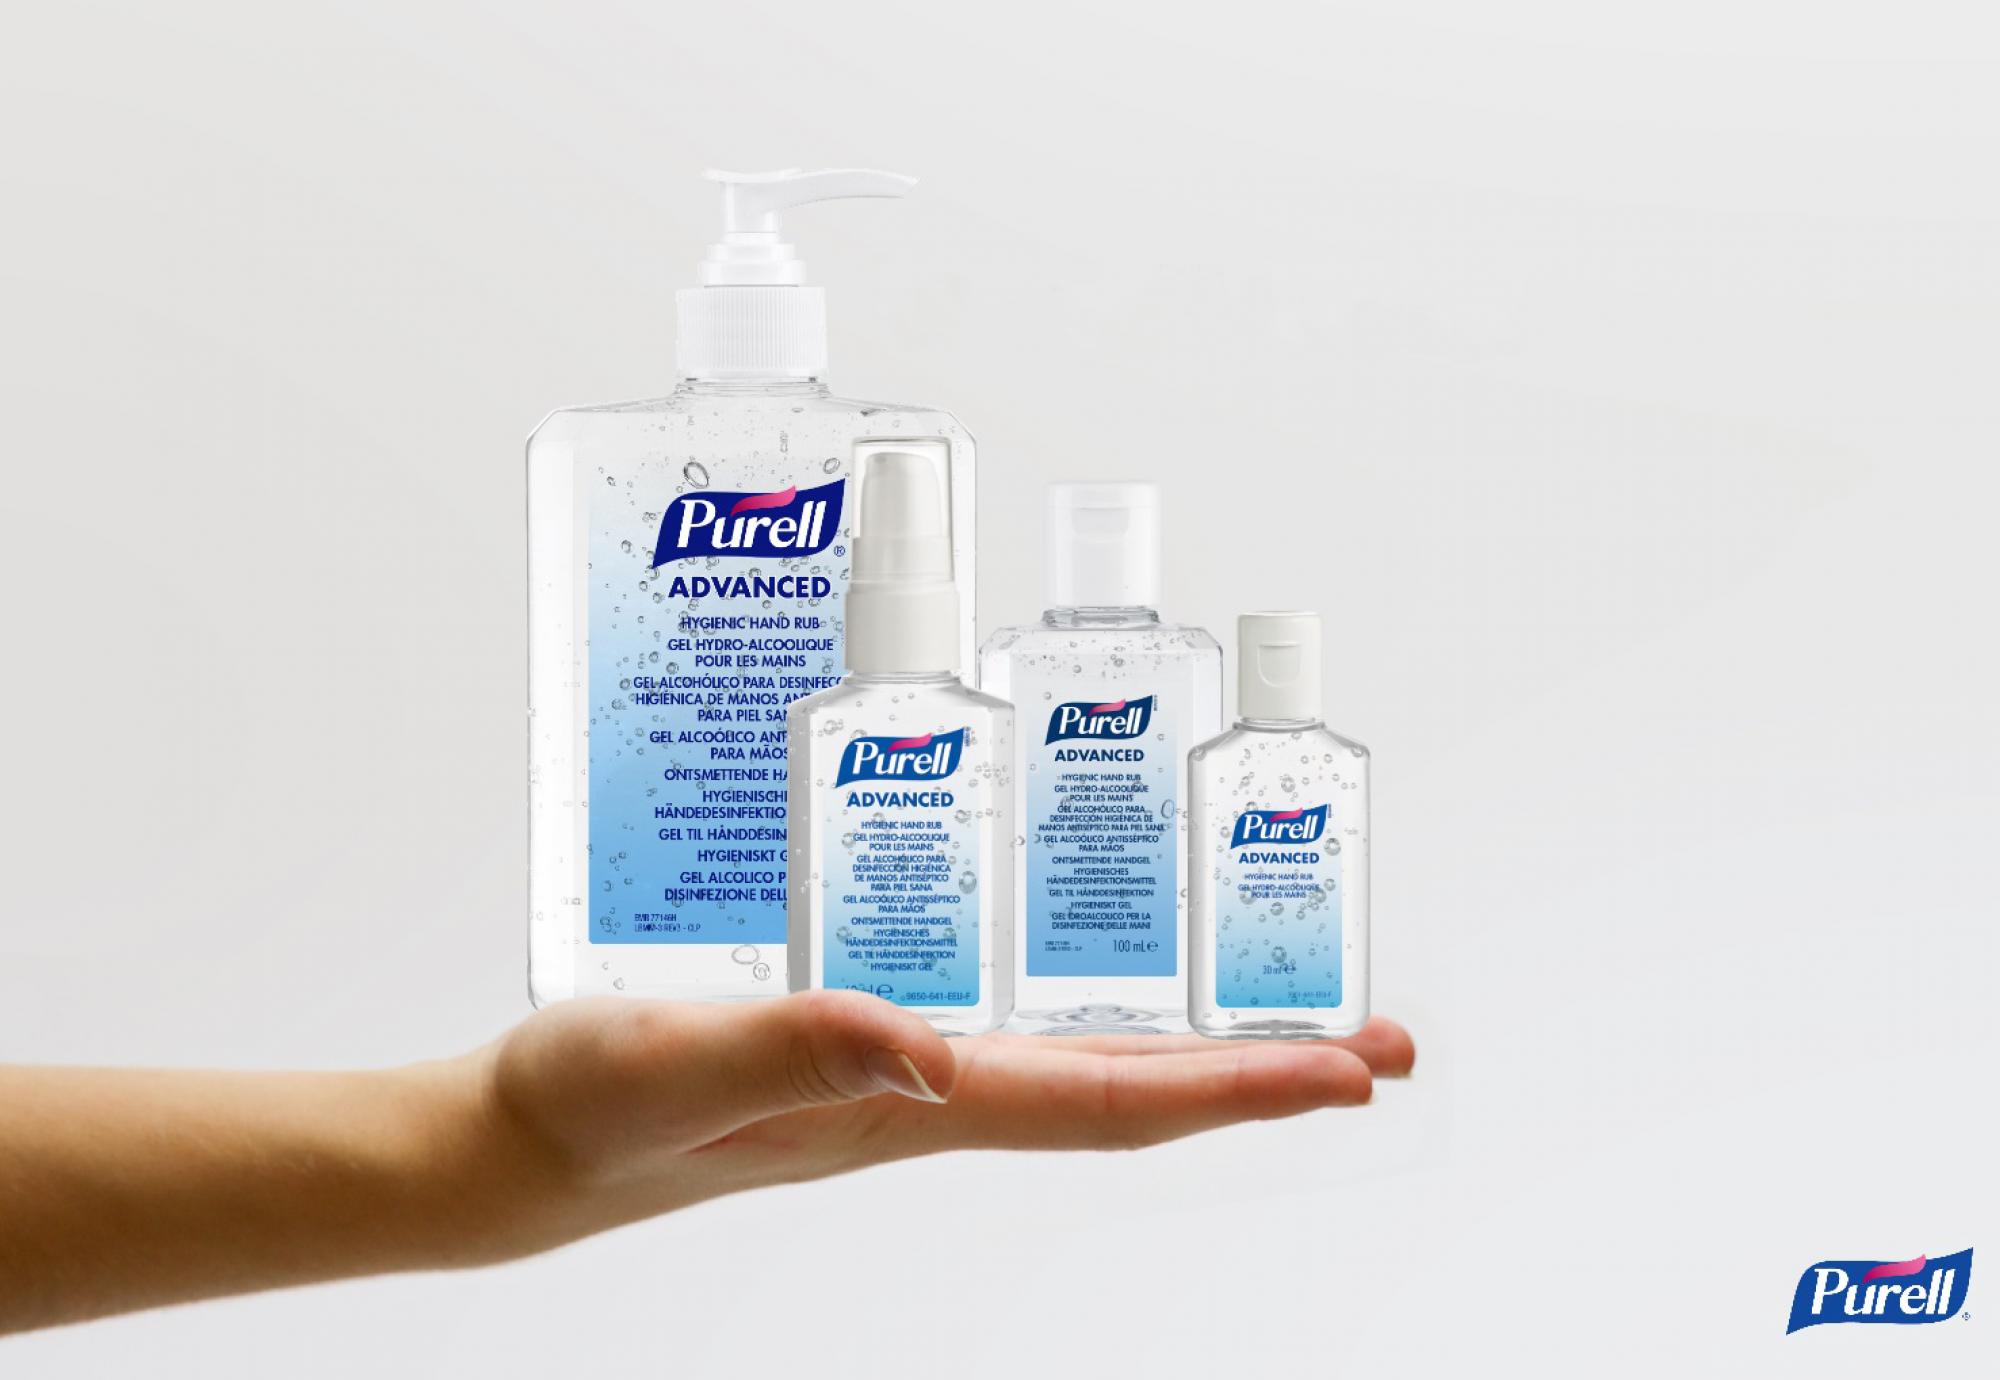 PURELL bottles being held up for display